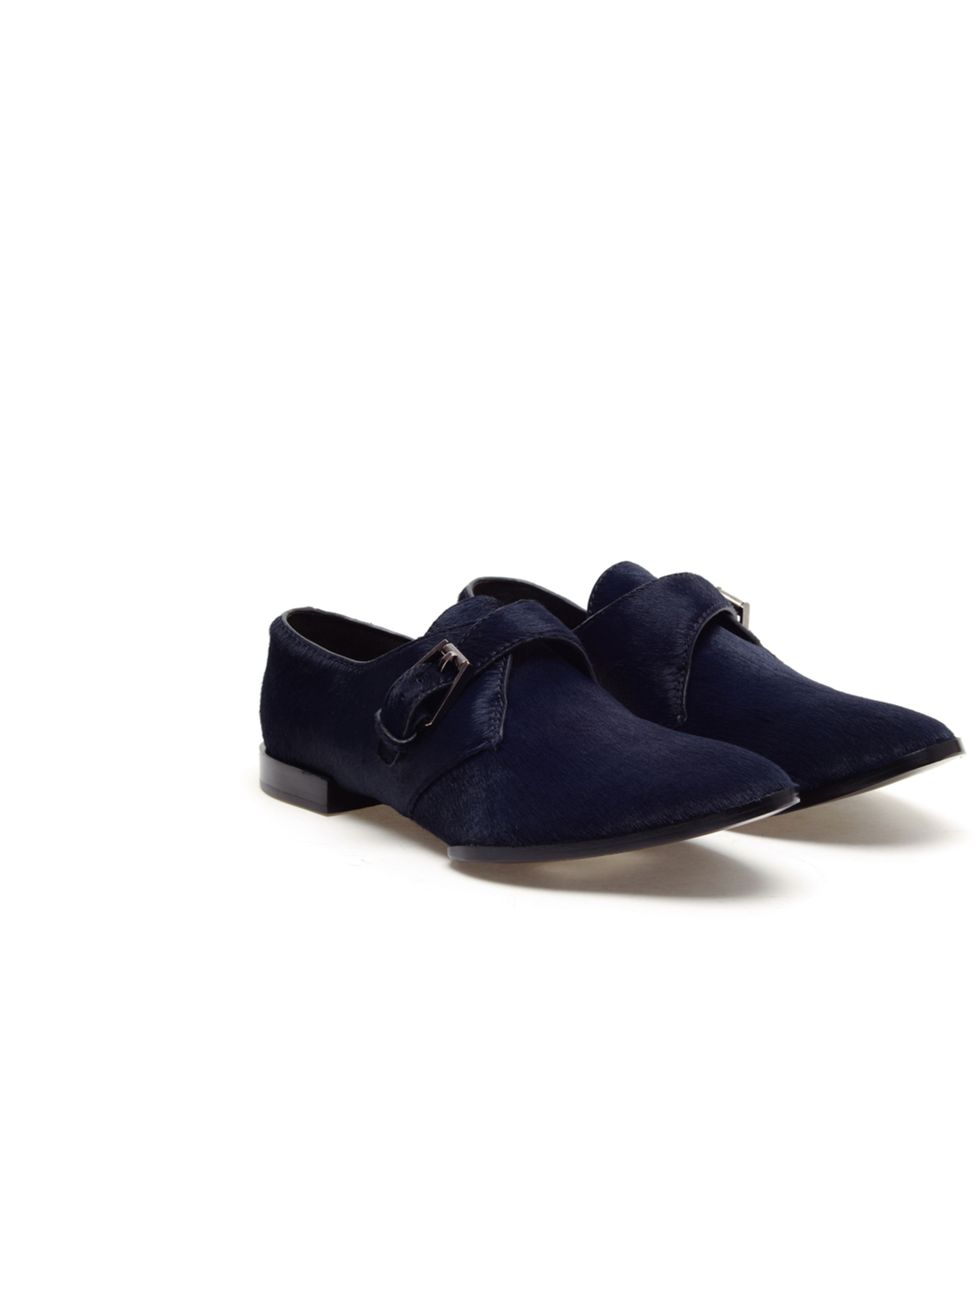 <p>Donna Wallace, Accessories Editor: 'It's hard to find a good navy shoe, especially one in the sale. But these are luxe and will go with lots of things in my wardrobe.'</p><p>Alexander Wang Oxford shoes, were £425 now £212, at Browns</p><p><a href="http